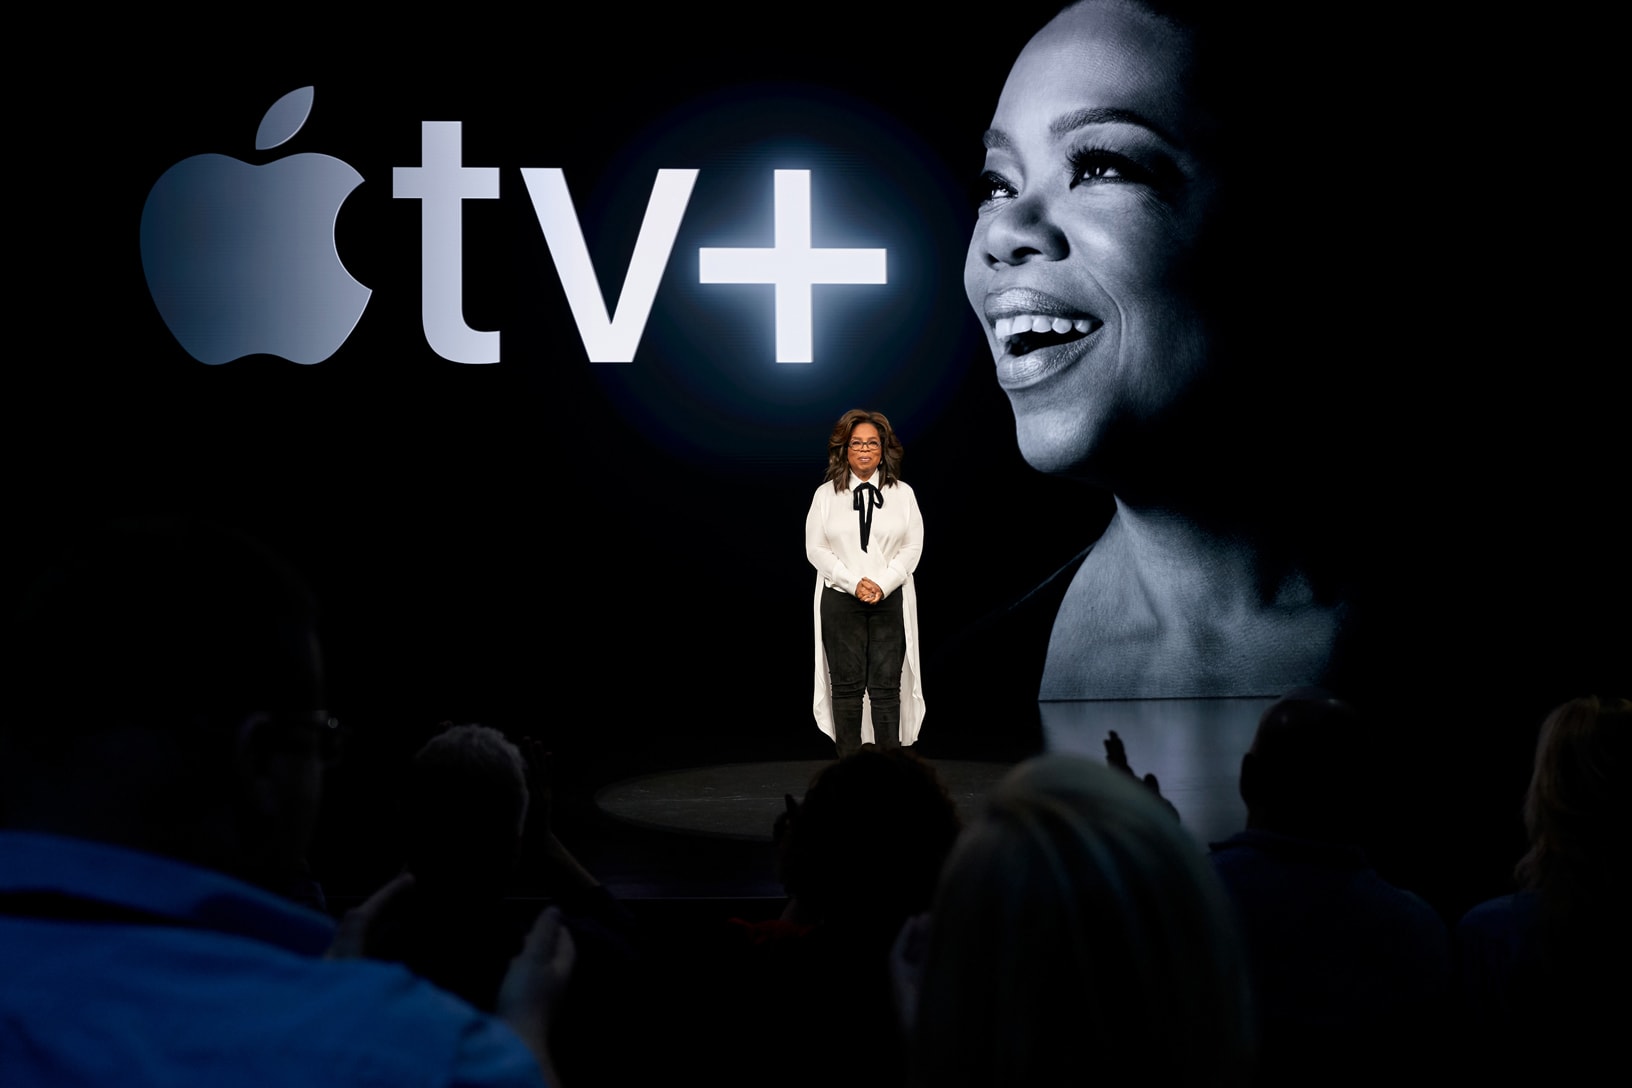 Oprah Winfrey says Apple TV+ can have a genuine impact on humanity.